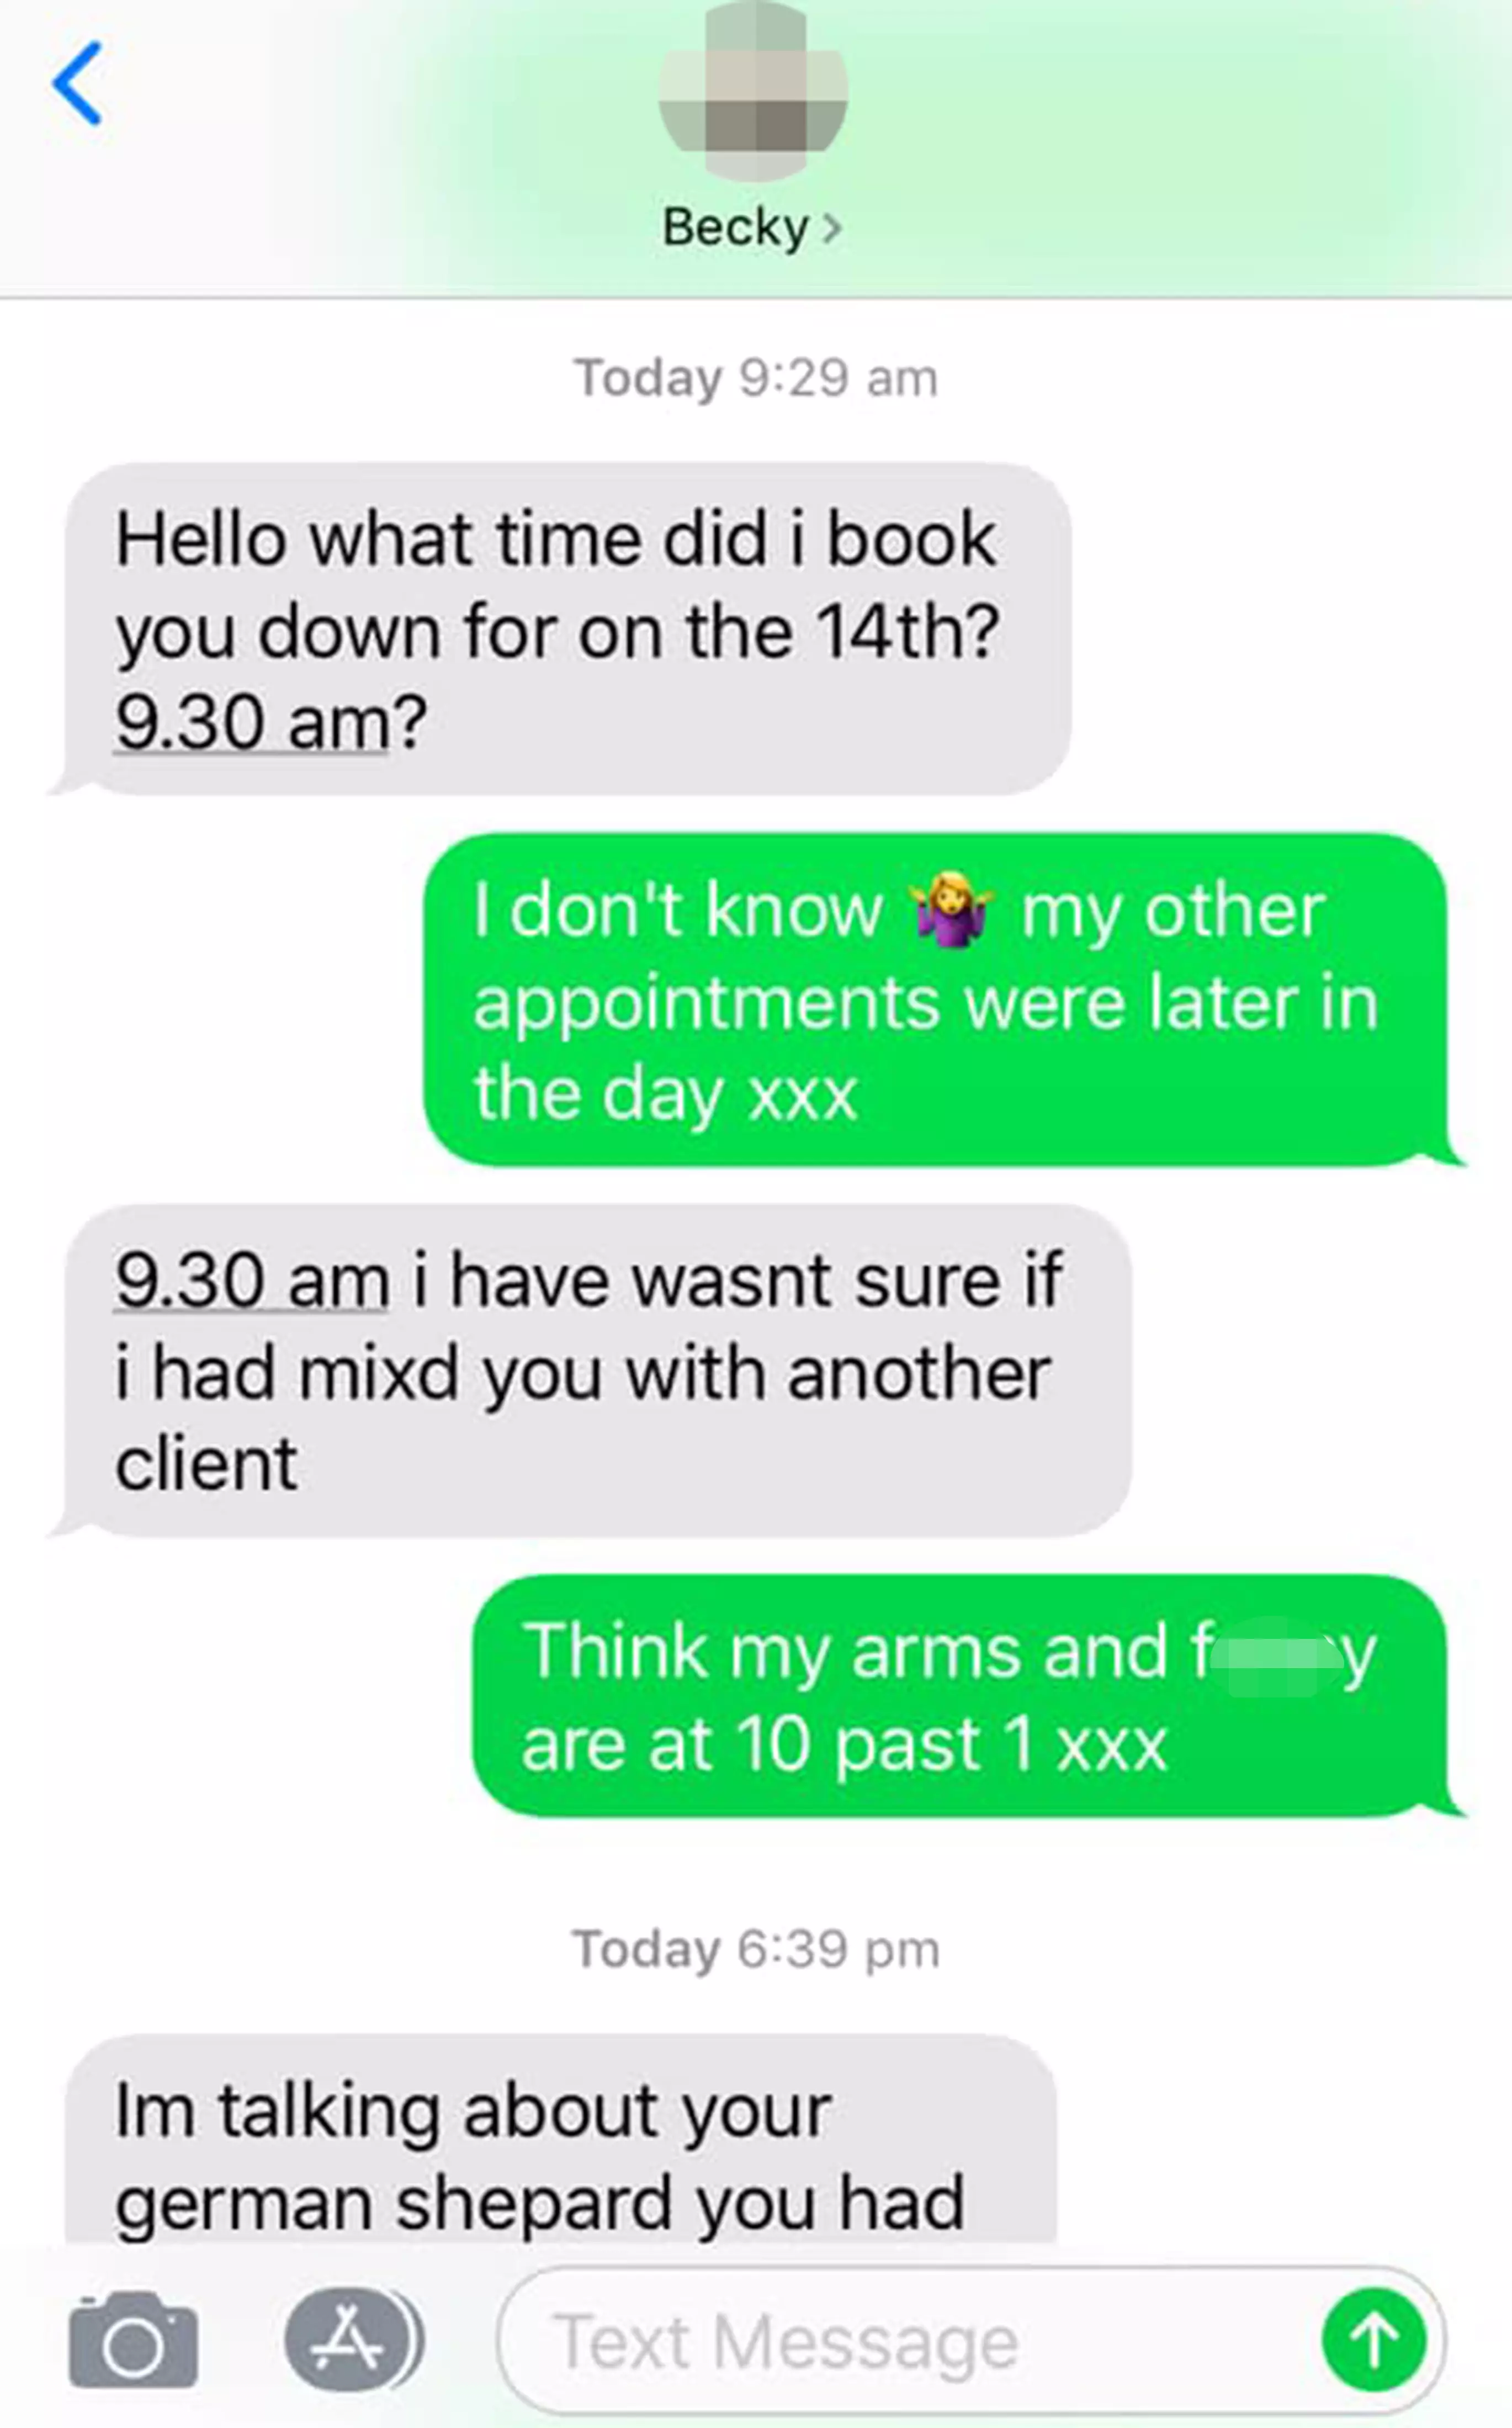 The mum-of-two confirmed the appointment time, just the wrong one... (